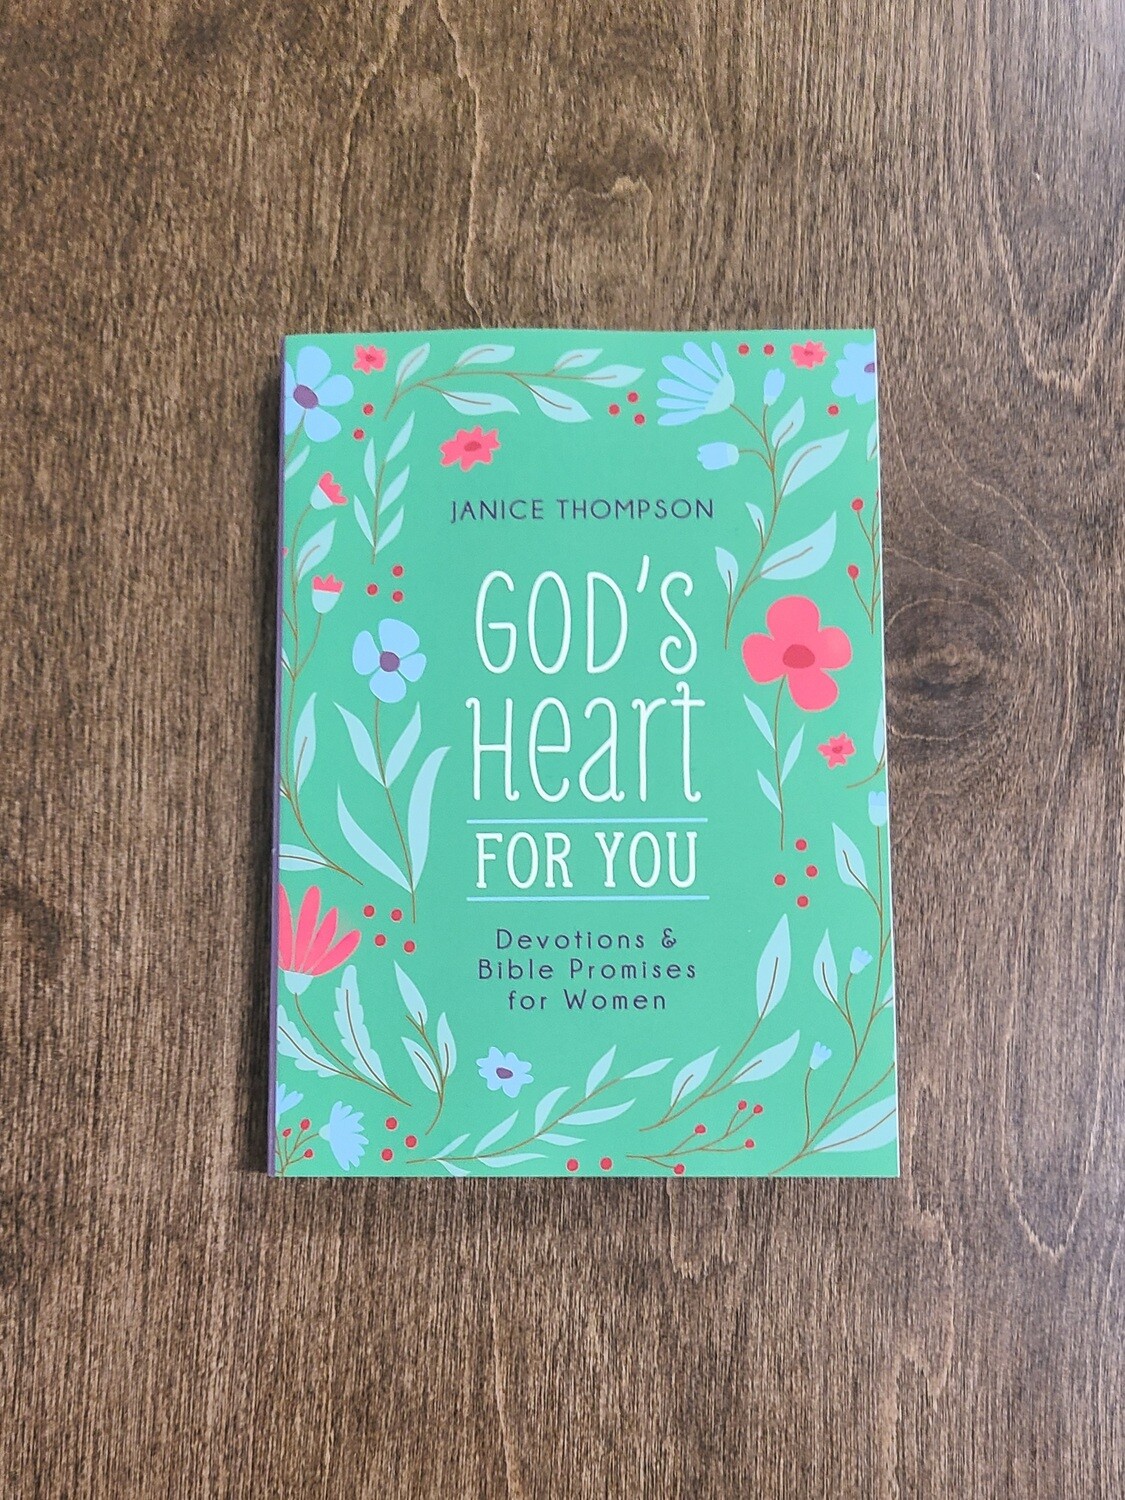 God's Heart for You: Devotions and Bible Promises for Women by Janice Thompson